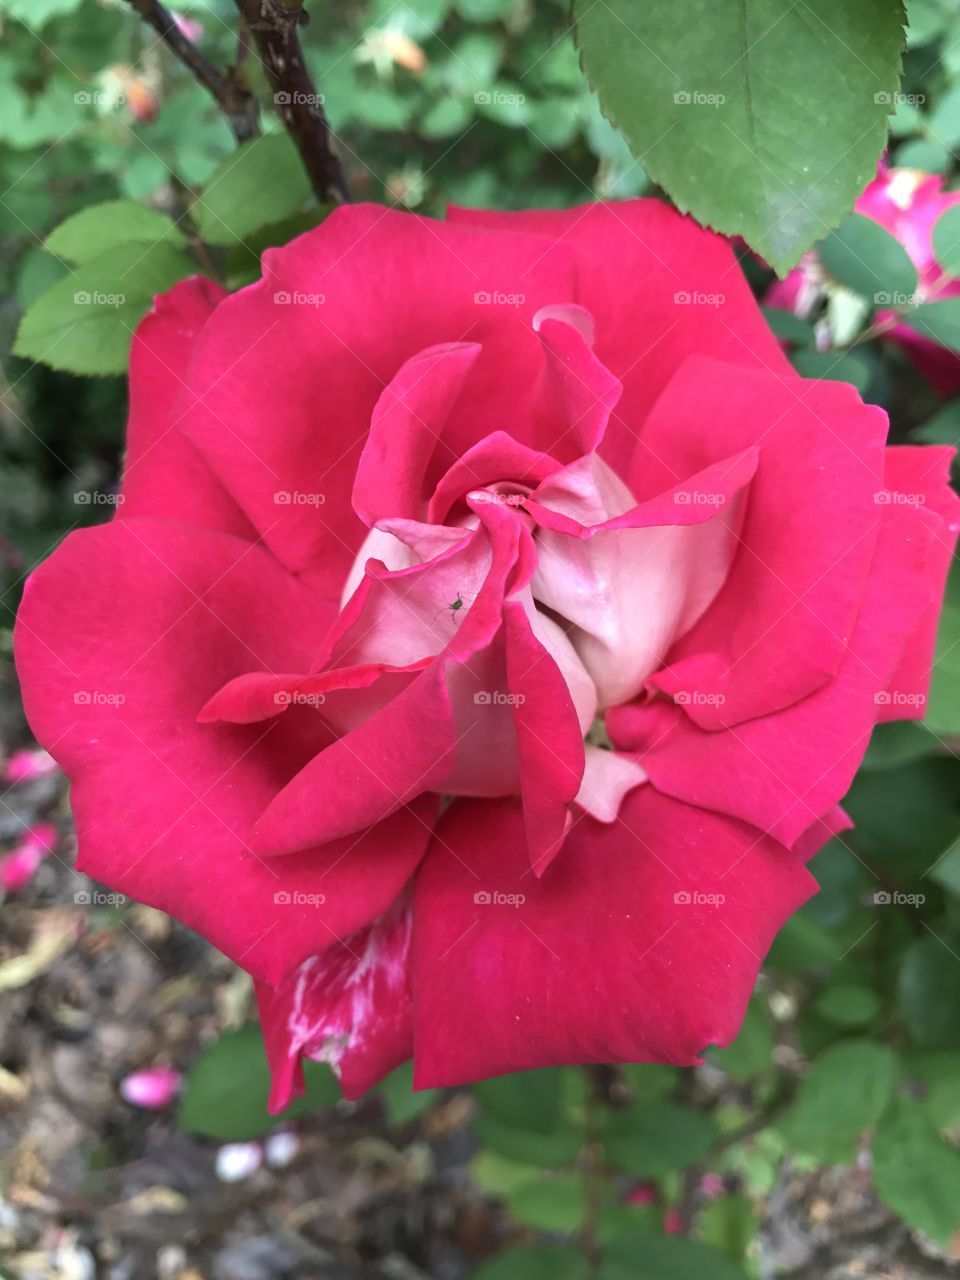 Pink rose with white center